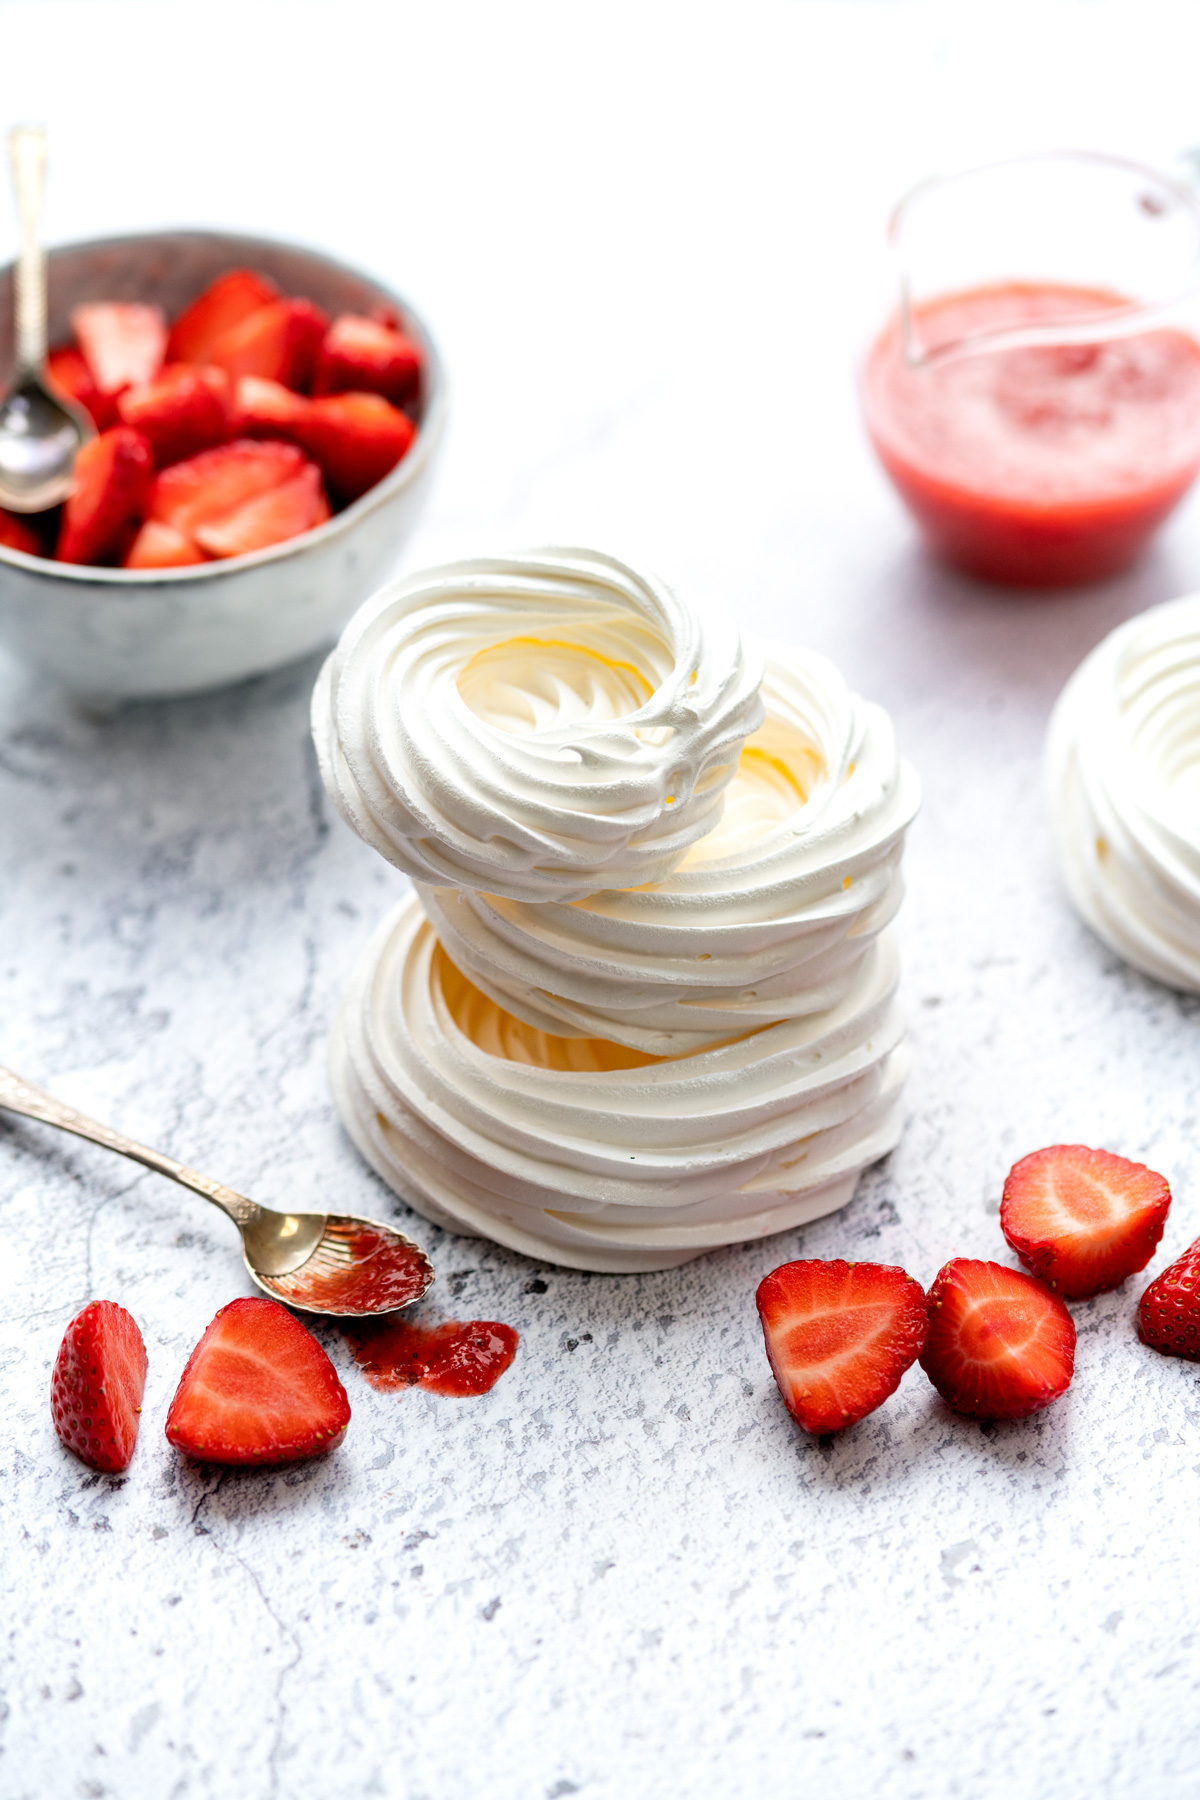 Perfect Meringue Nests | Step By Step Guide - Supergolden Bakes